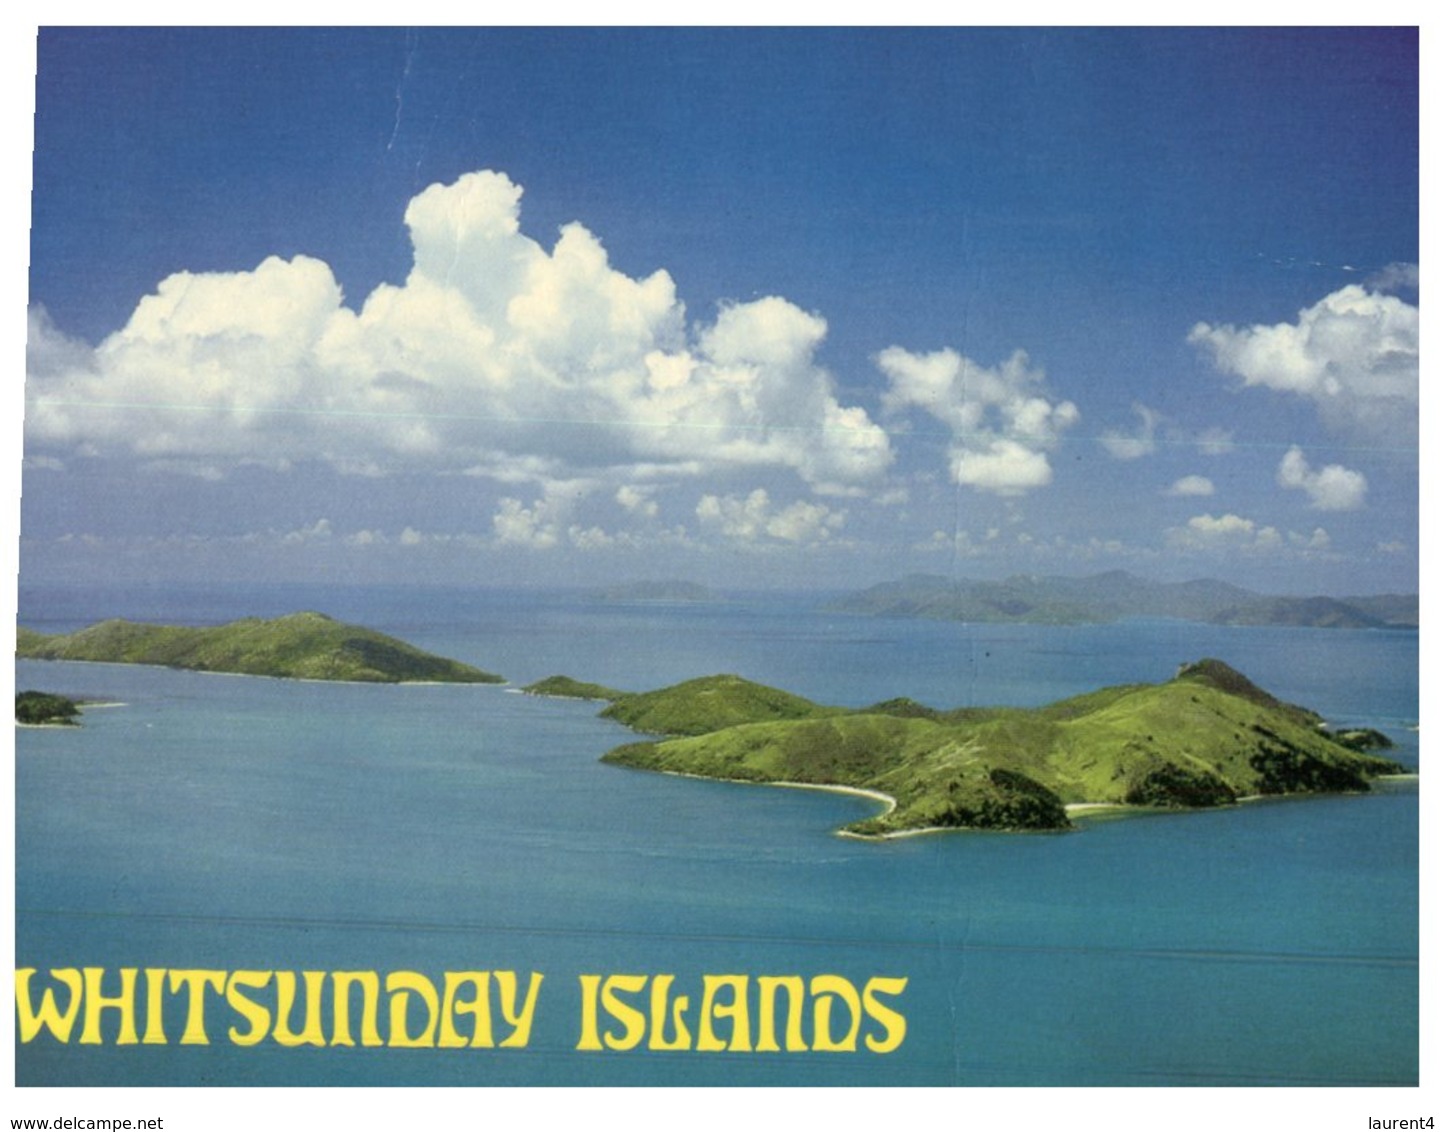 (104) Australia - QLD - Whitsunday Islands - Great Barrier Reef